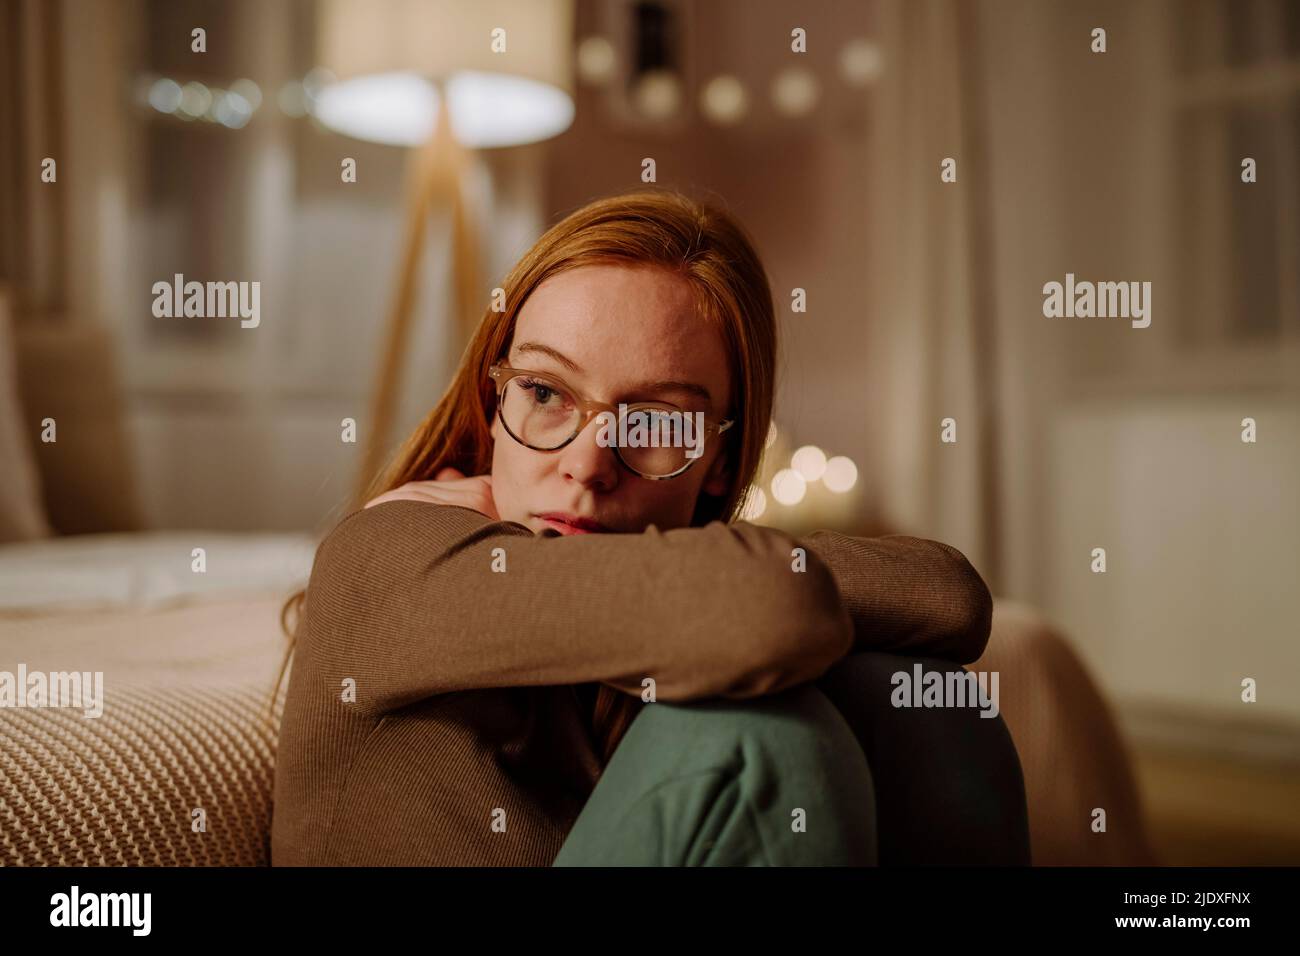 Sad redhead woman sitting in front of bed at home Stock Photo